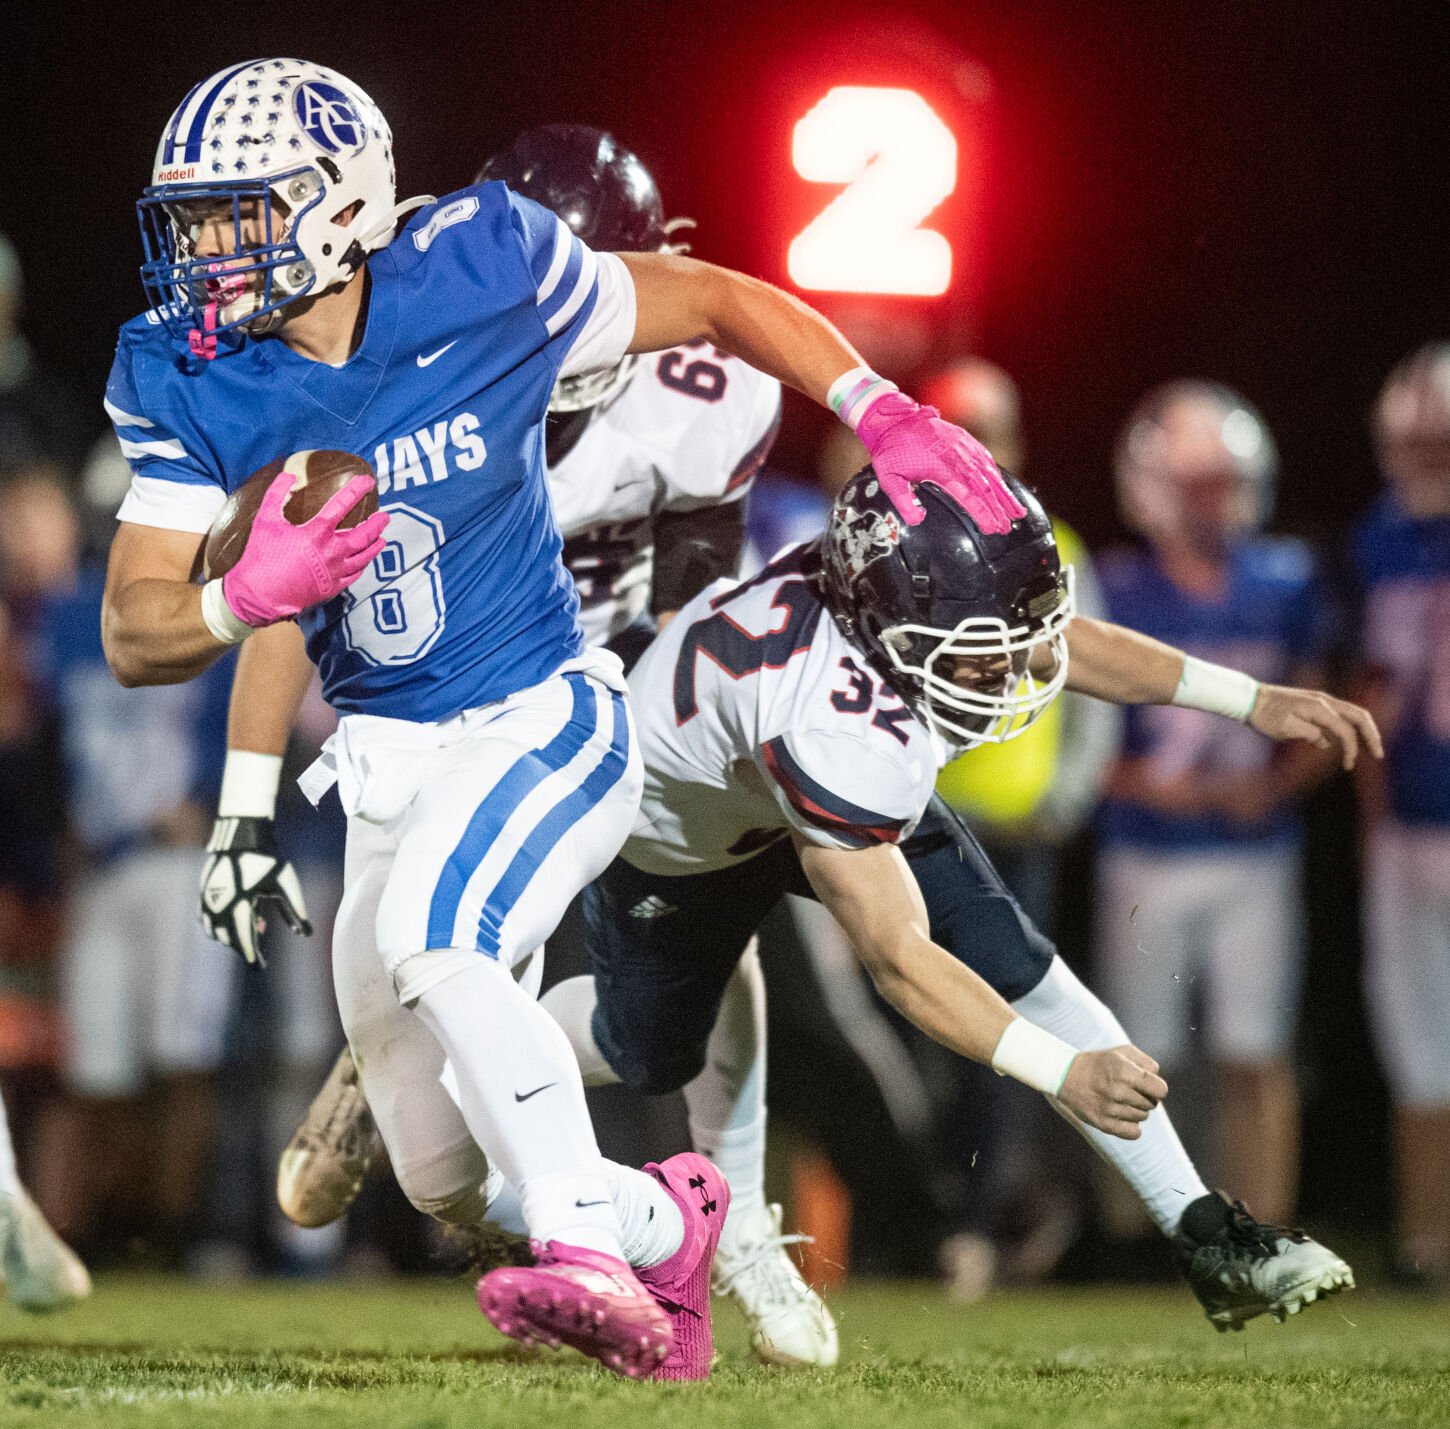 Ashland-Greenwood dominates Adams Central 34-8 to advance to Class C-1 semifinals